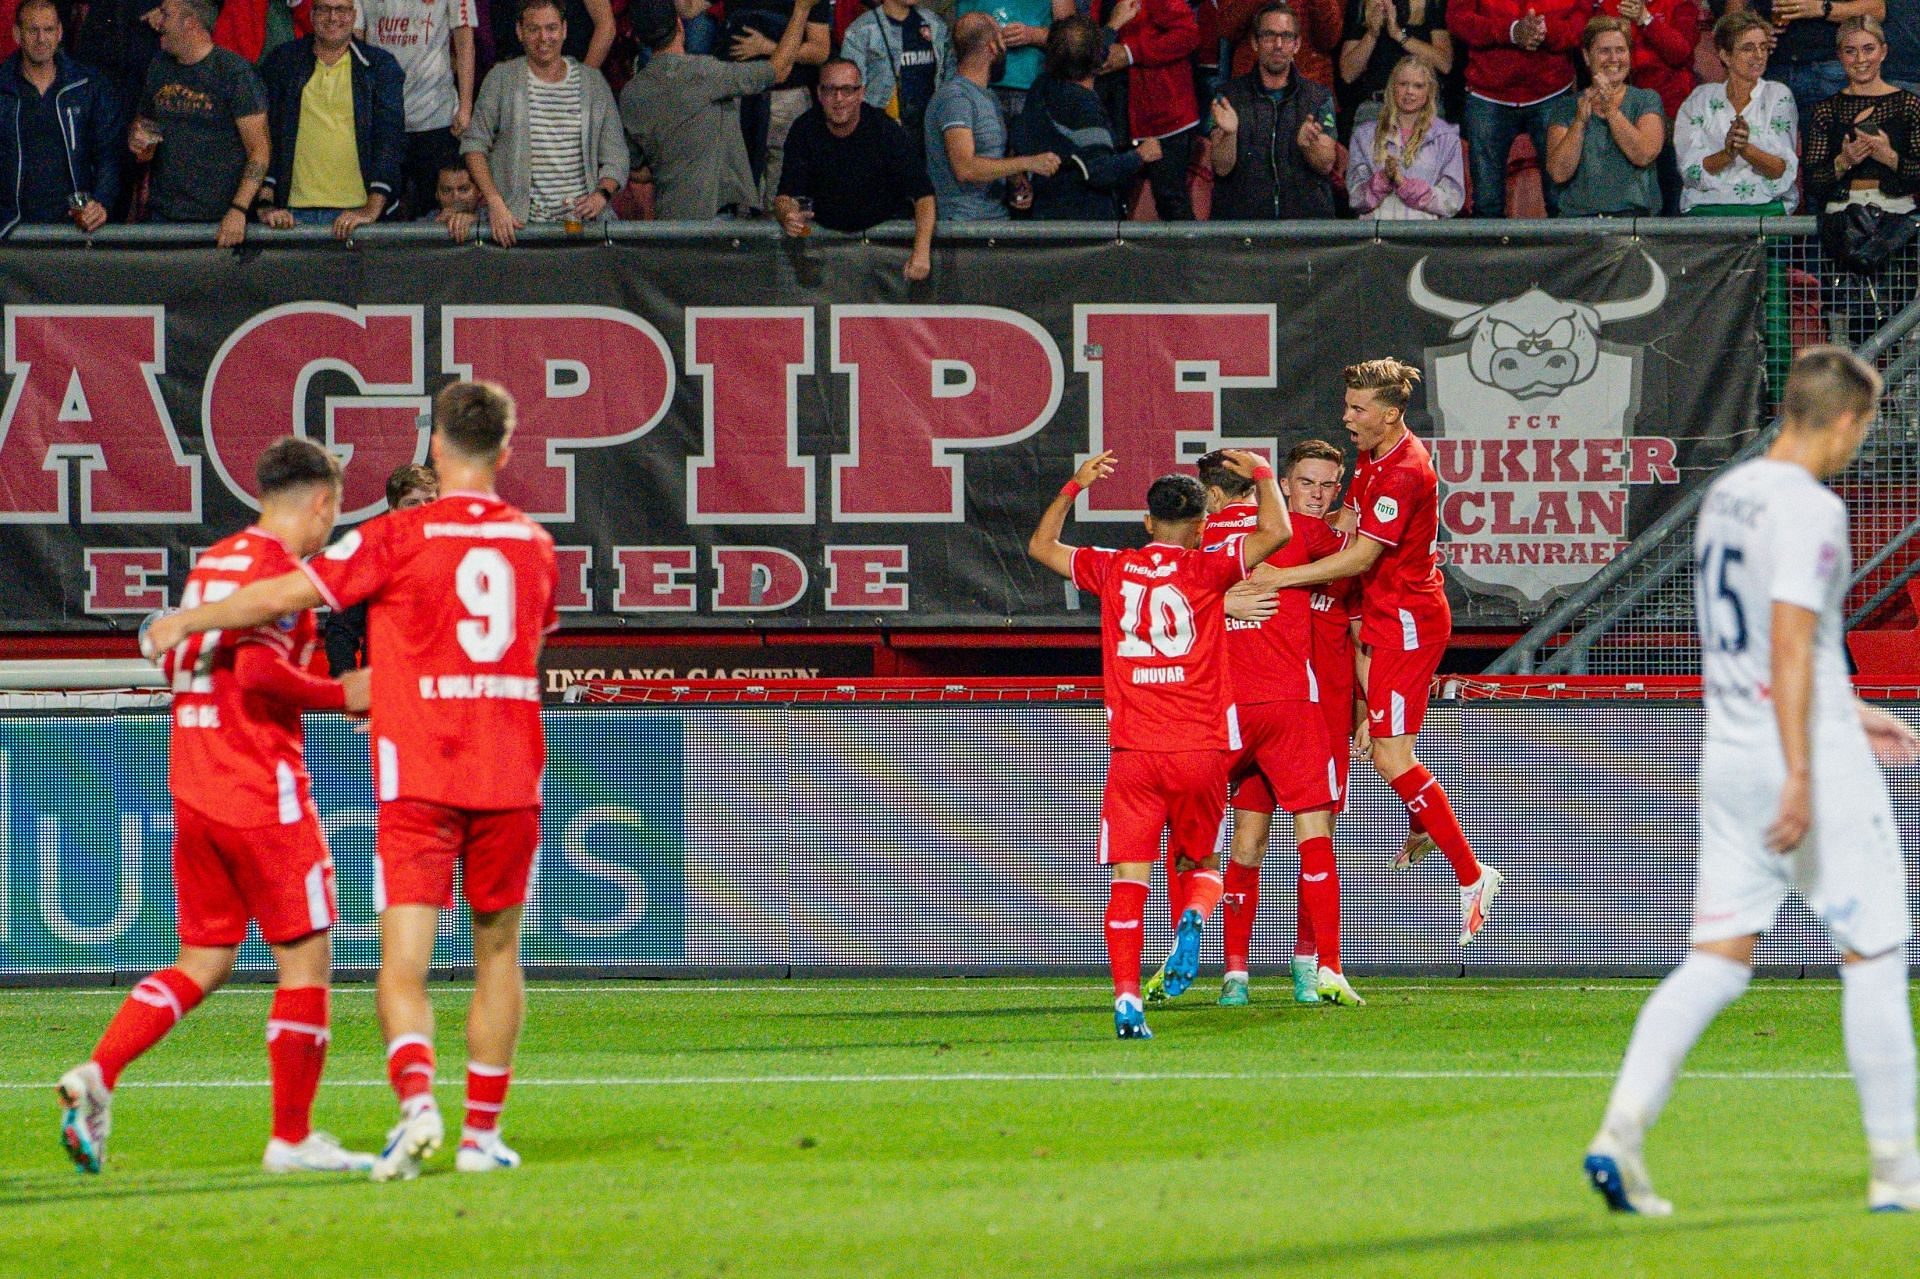 Riga and Twente will meet in the Europa Conference League qualifier on Thursday